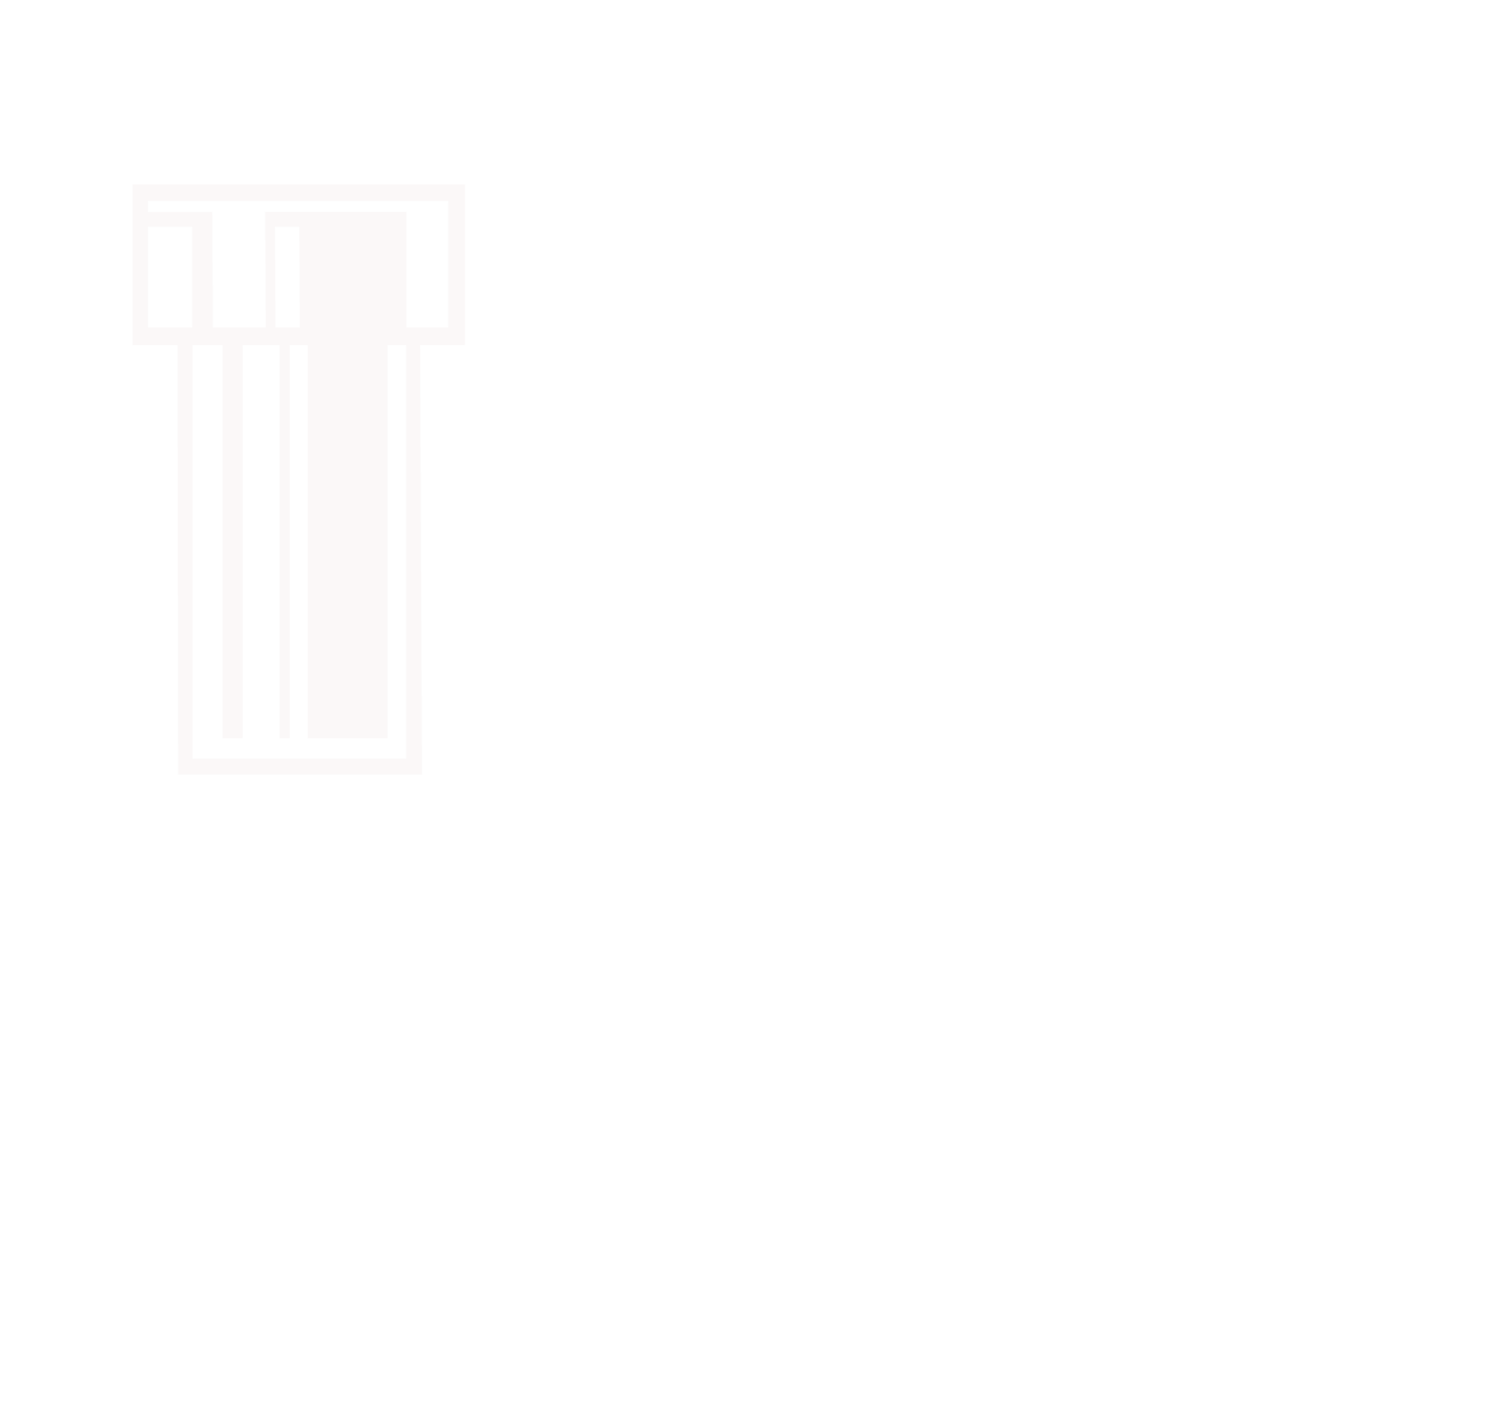 Two Plumbers Event Space